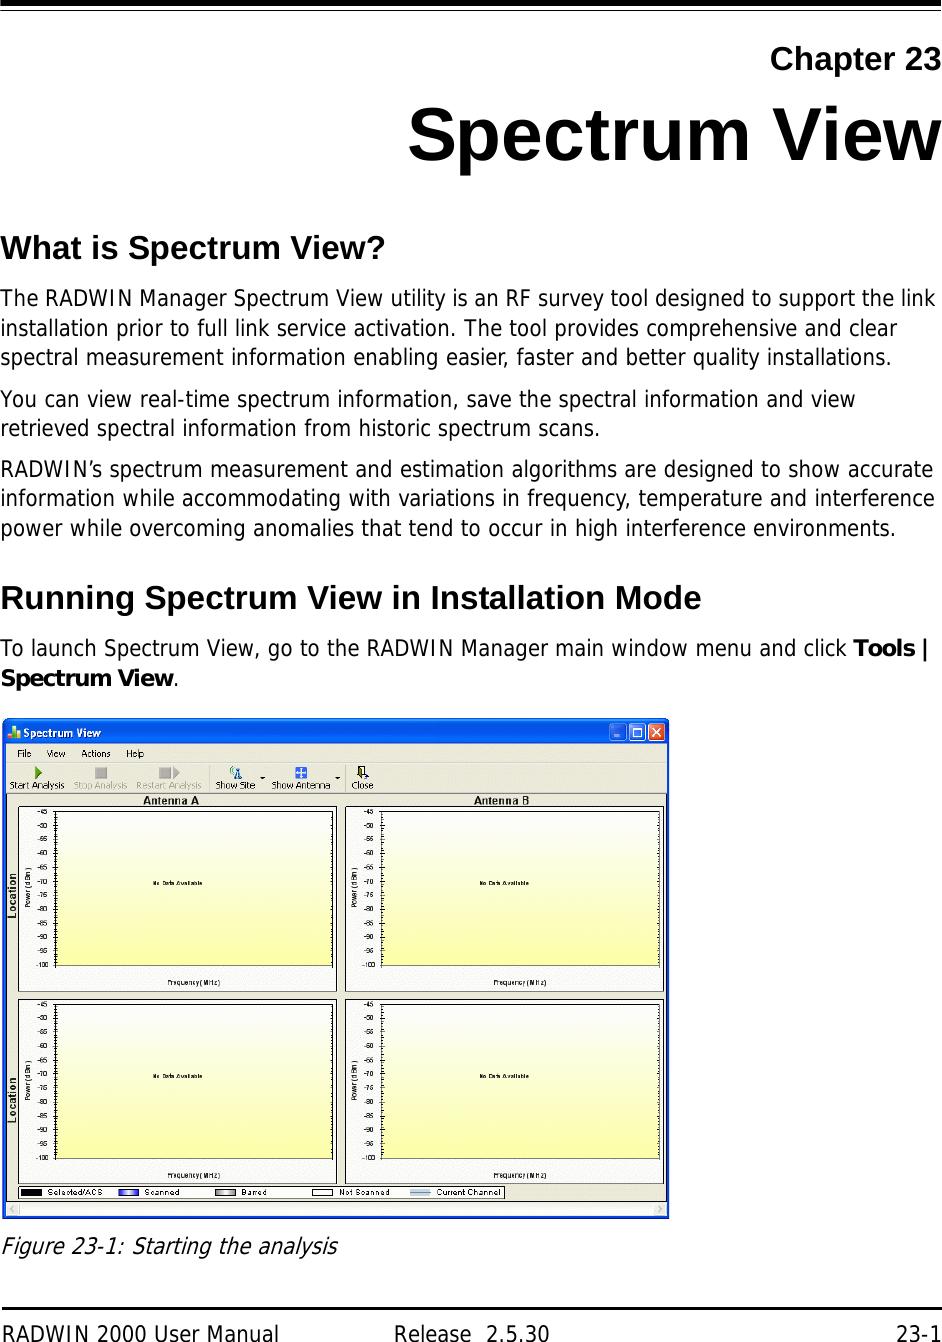 RADWIN 2000 User Manual Release  2.5.30 23-1Chapter 23Spectrum ViewWhat is Spectrum View?The RADWIN Manager Spectrum View utility is an RF survey tool designed to support the link installation prior to full link service activation. The tool provides comprehensive and clear spectral measurement information enabling easier, faster and better quality installations.You can view real-time spectrum information, save the spectral information and view retrieved spectral information from historic spectrum scans.RADWIN’s spectrum measurement and estimation algorithms are designed to show accurate information while accommodating with variations in frequency, temperature and interference power while overcoming anomalies that tend to occur in high interference environments.Running Spectrum View in Installation ModeTo launch Spectrum View, go to the RADWIN Manager main window menu and click Tools | Spectrum View.Figure 23-1: Starting the analysis